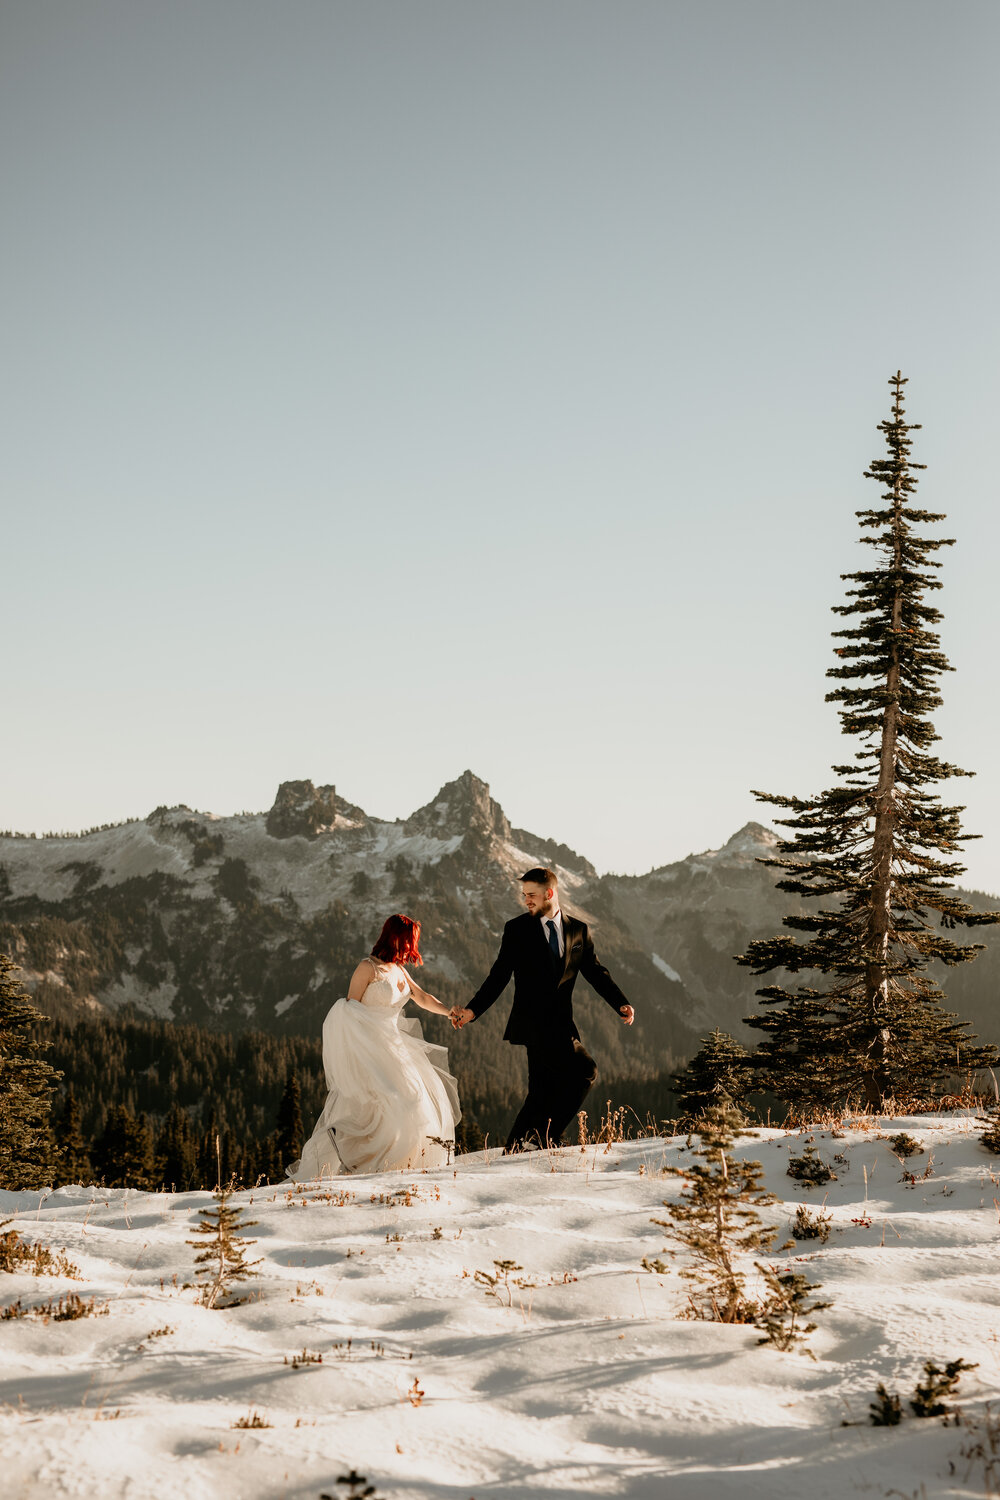 how to have a sustainable elopement! Here’s a guide to having an environmentally adventure wedding photography friendly elopement!